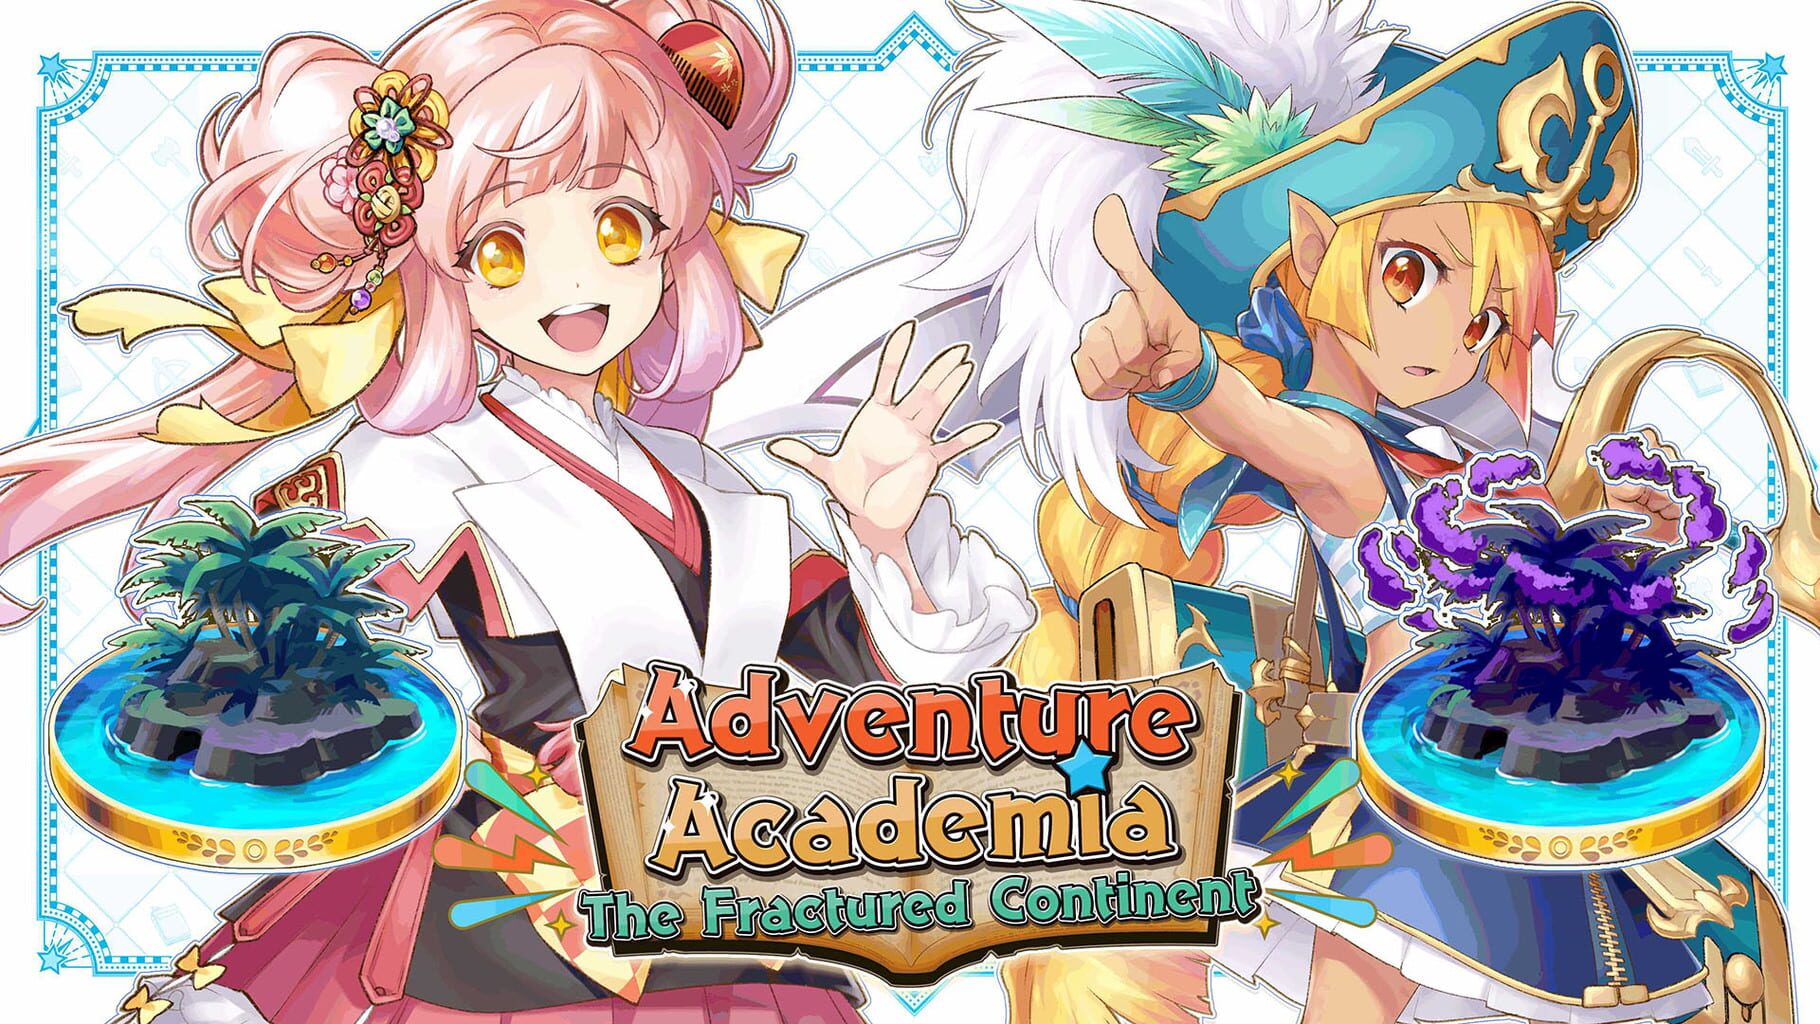 Adventure Academia: The Fractured Continent - Additional Content Vol.1 Bundle artwork